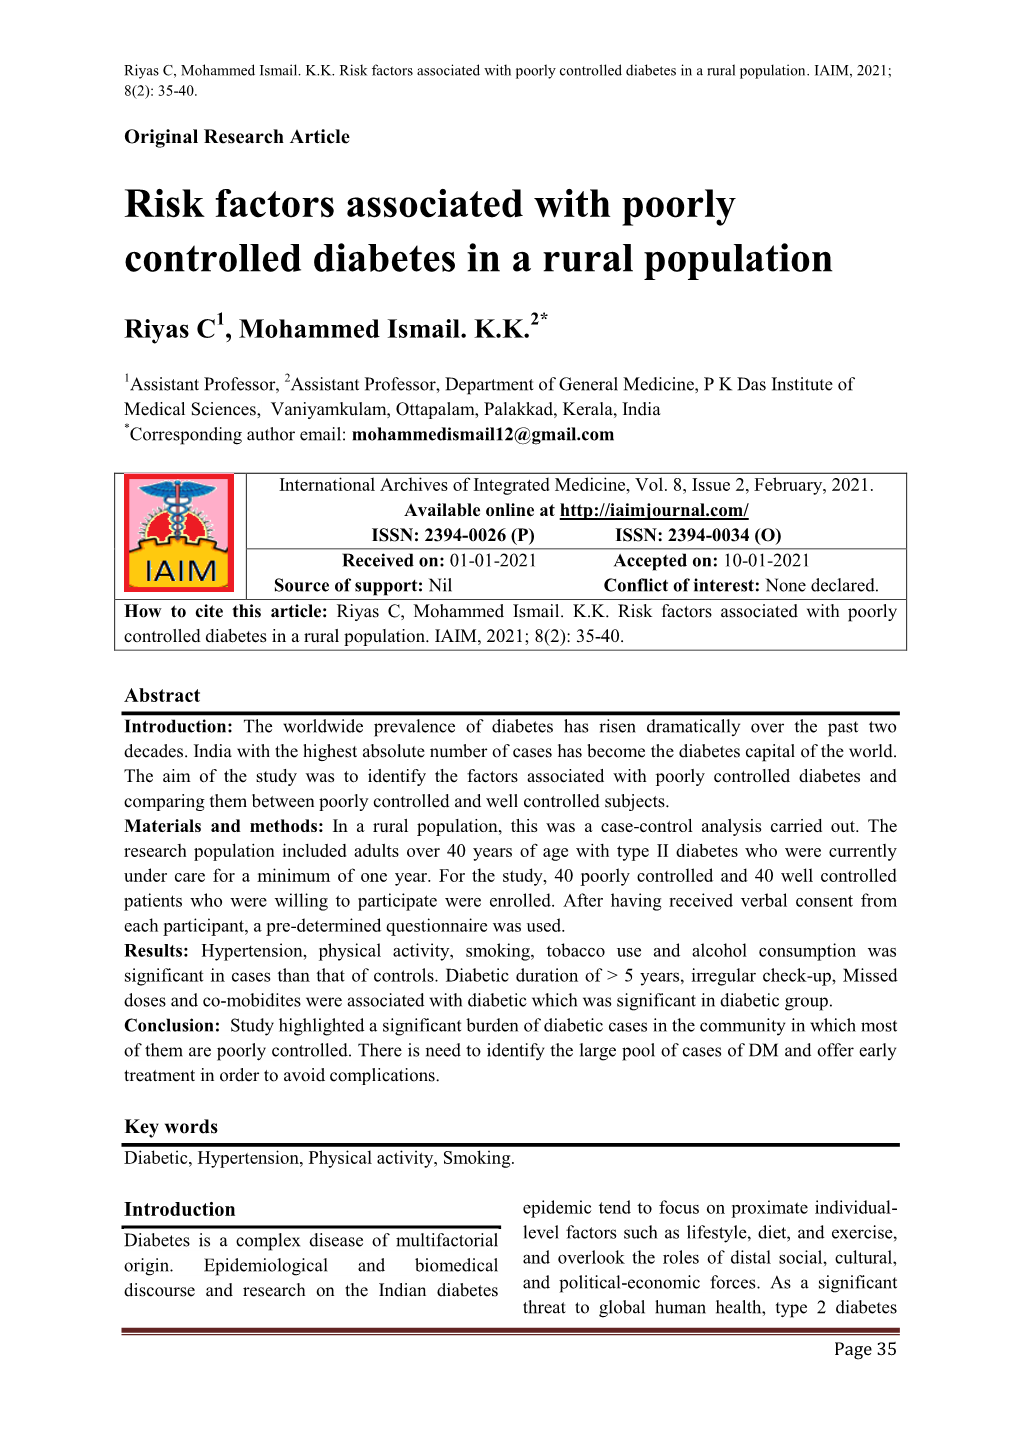 Risk Factors Associated with Poorly Controlled Diabetes in a Rural Population